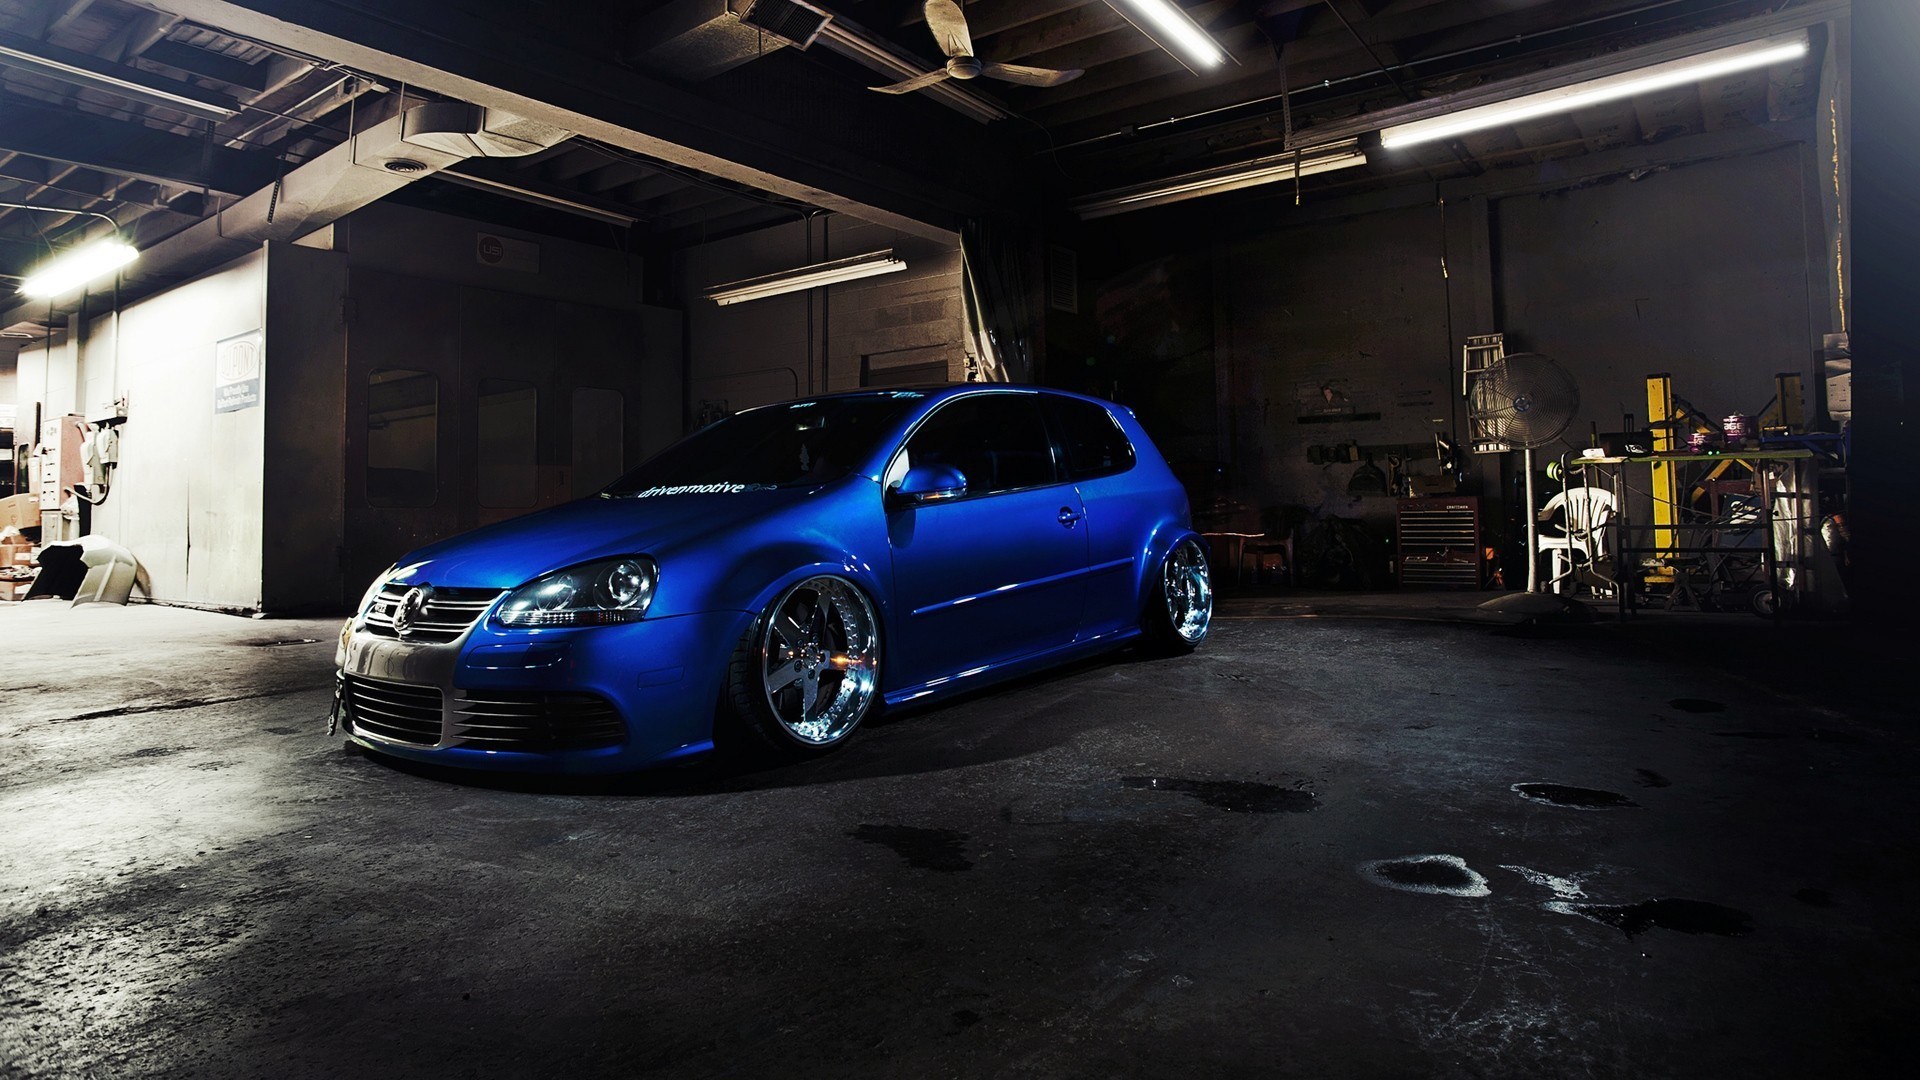 Download Volkswagen Golf R32 Photo pictures in high definition or 1920x1080